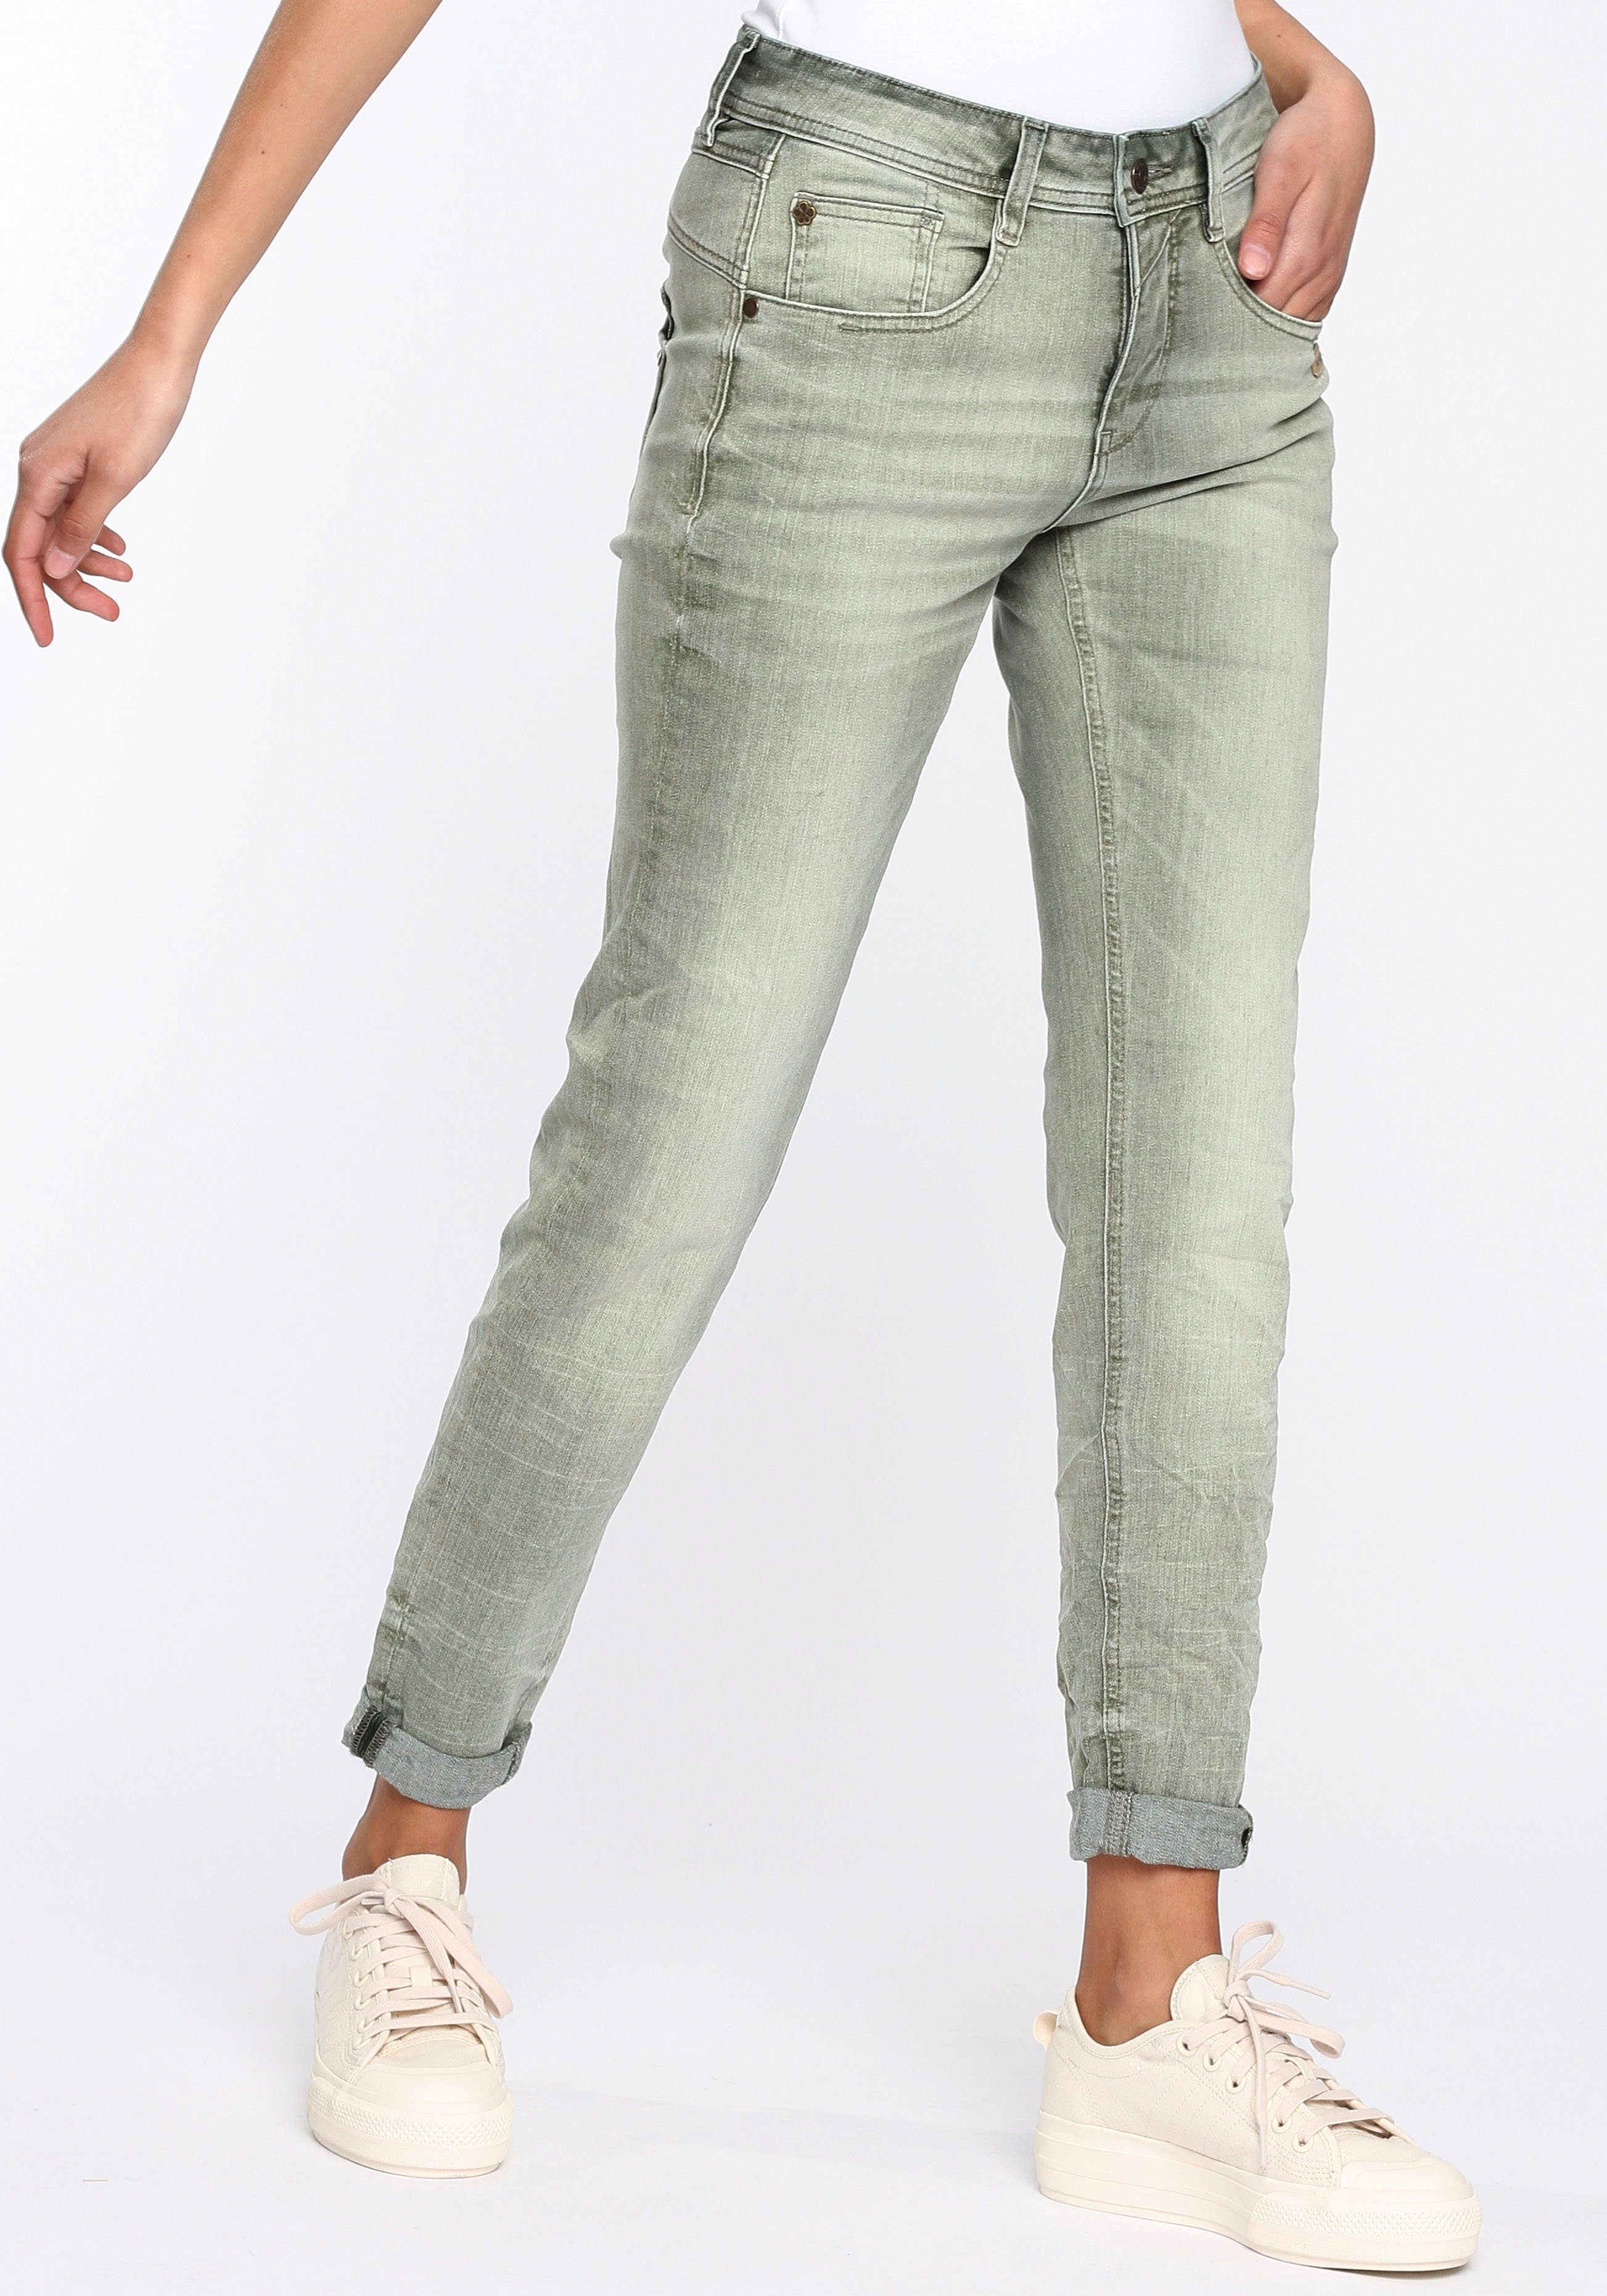 GANG Relax-fit-Jeans 94AMELIE perfekter (grey durch Elasthan-Anteil washed used) down Sitz